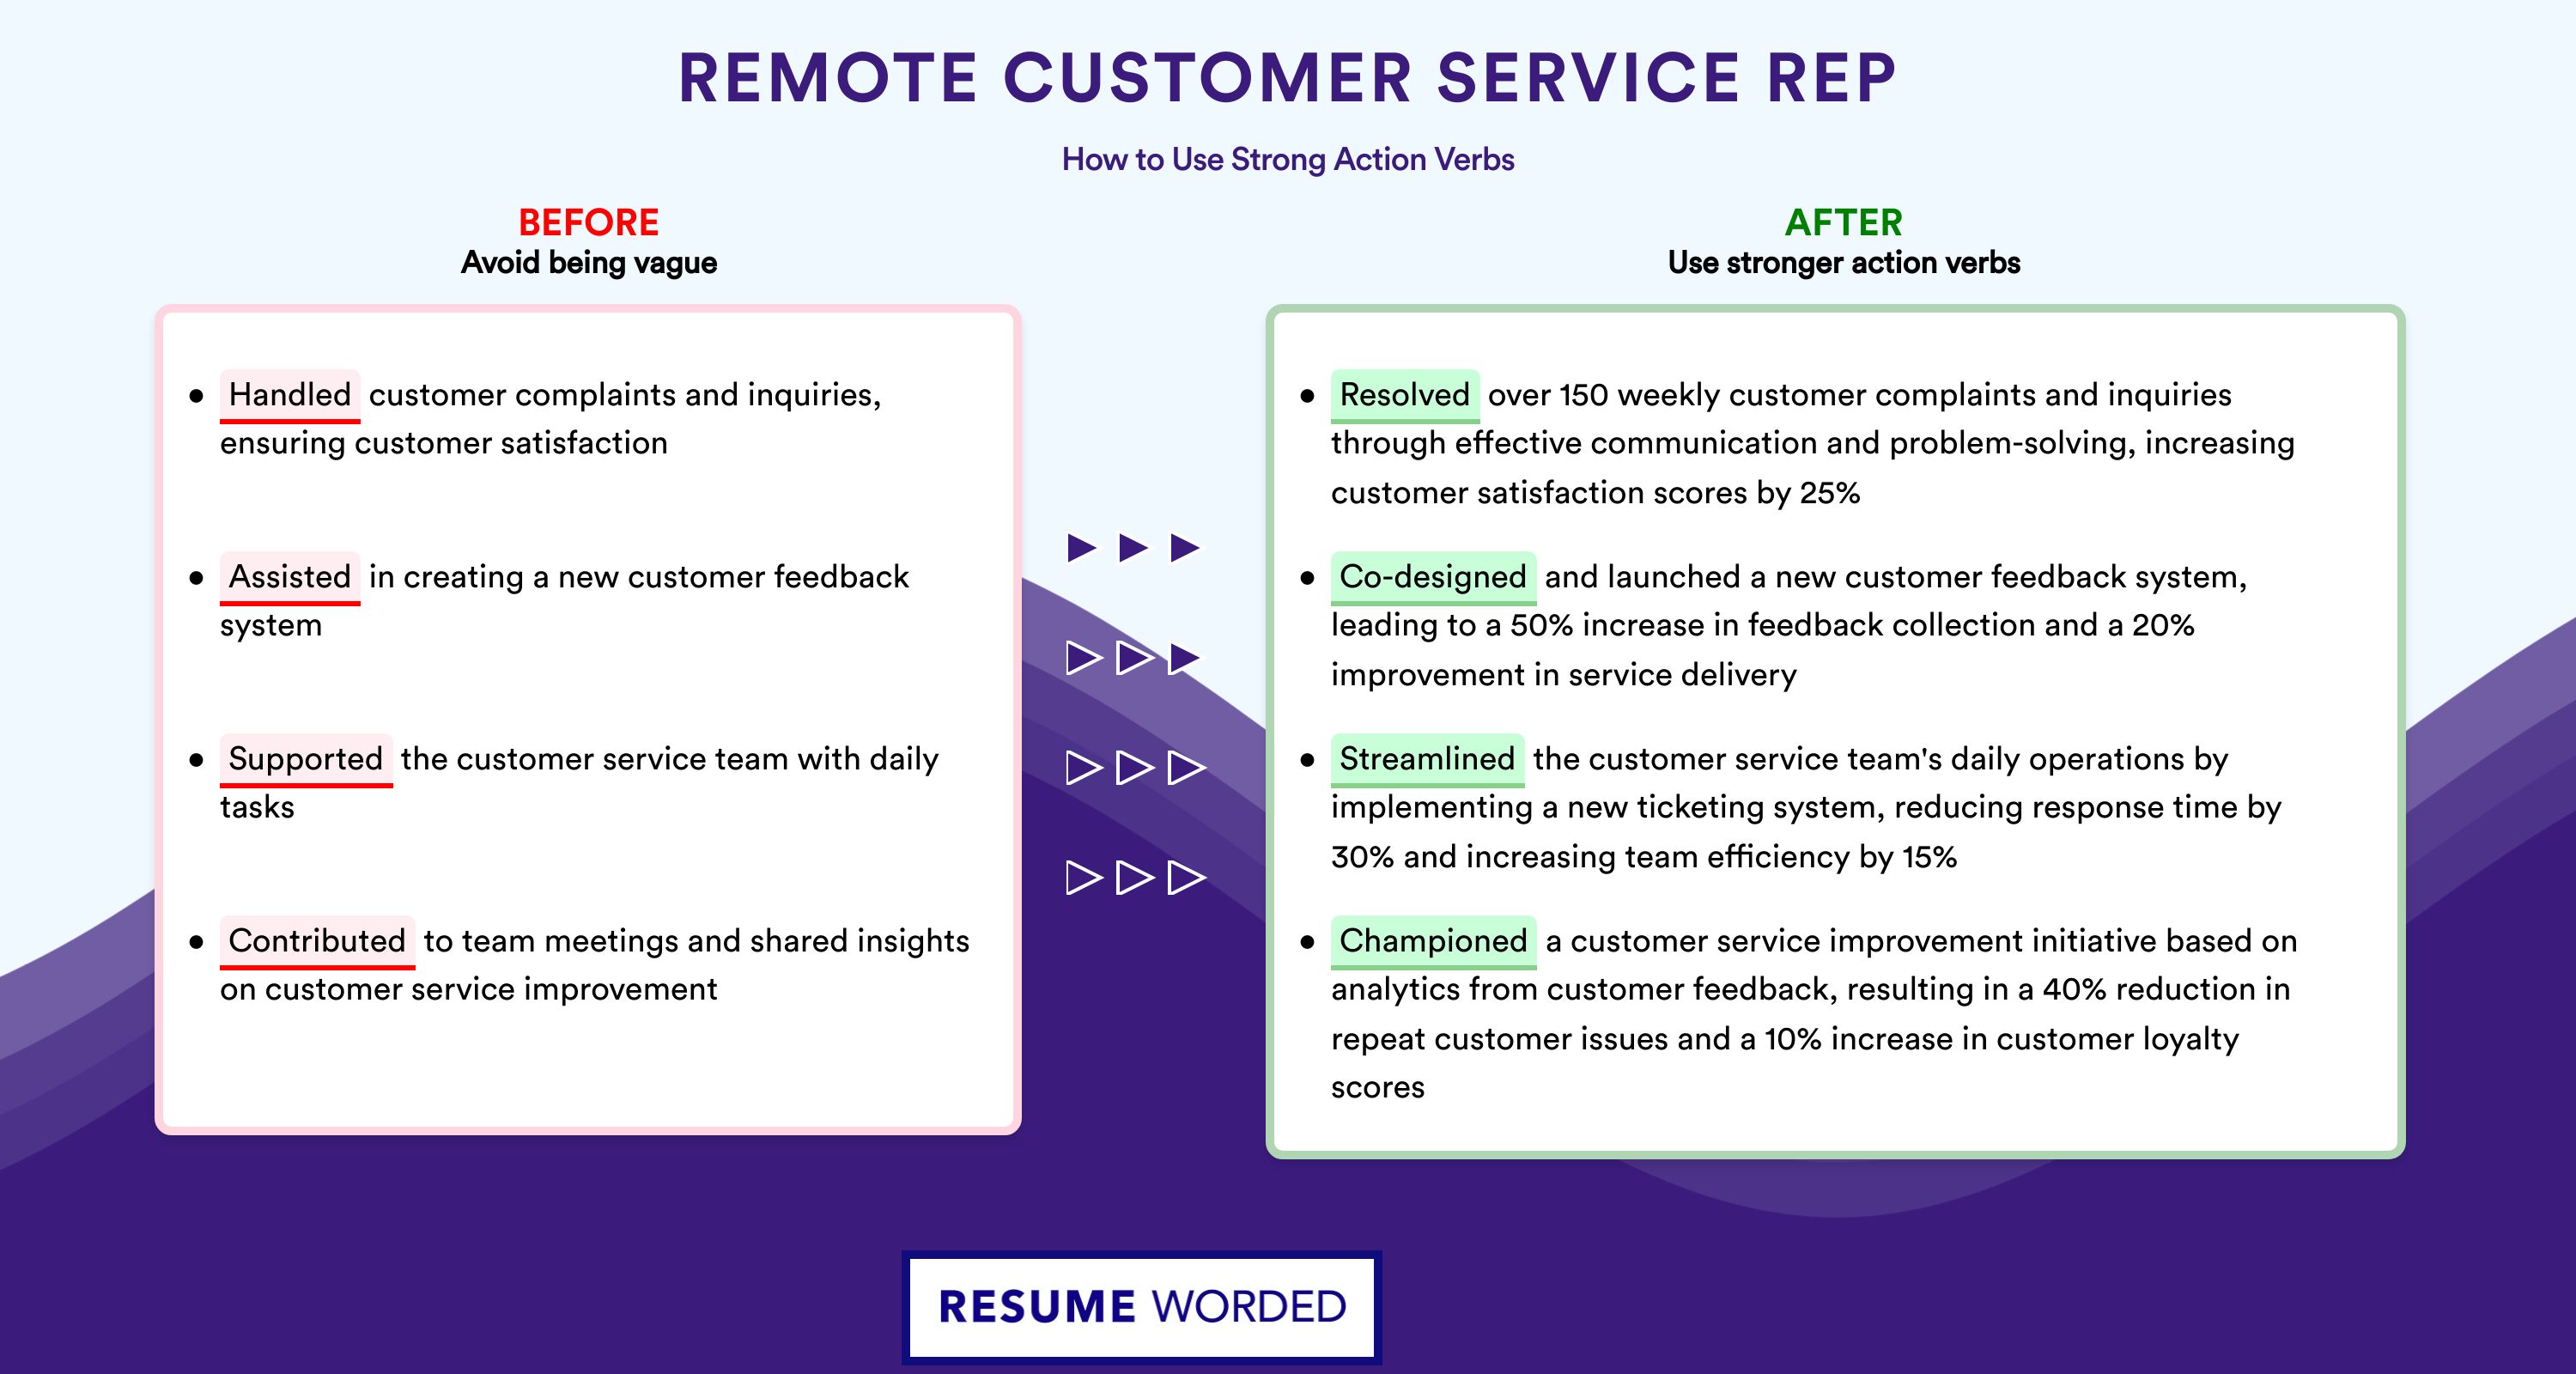 Action Verbs for Remote Customer Service Rep